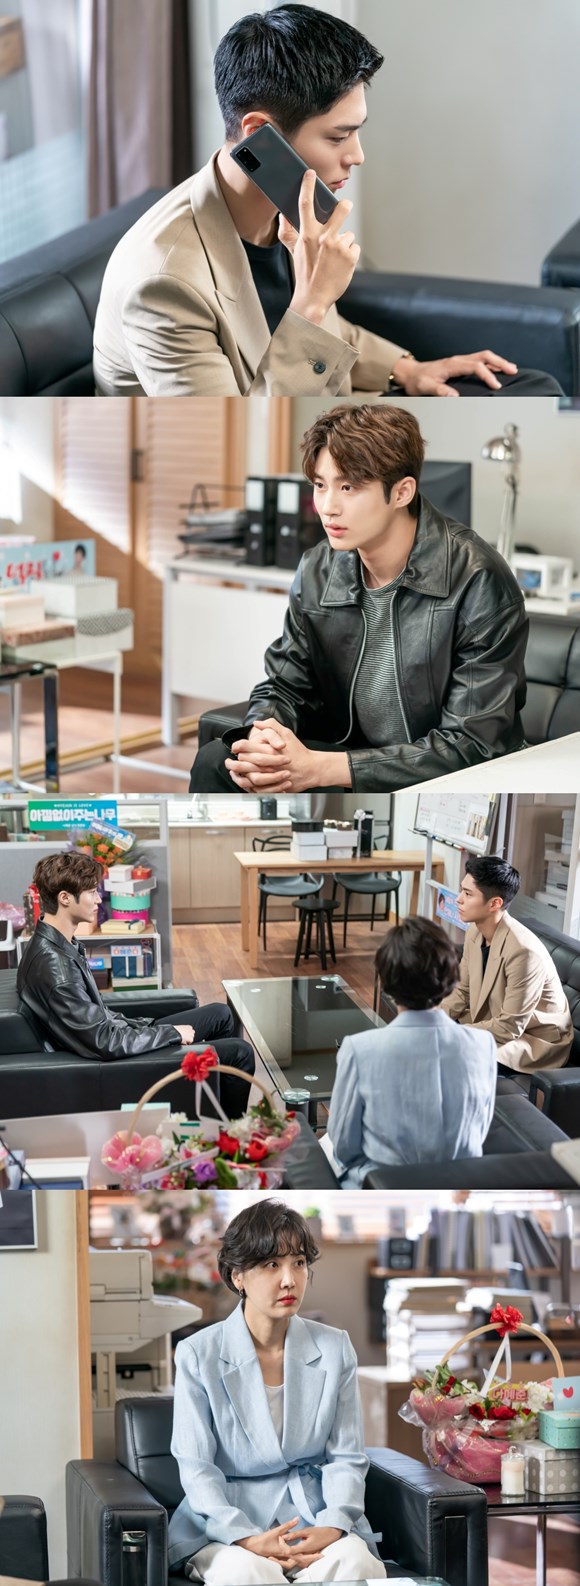 Record of Youth Park Bo-gum and Byeon Wooseok face each otherTVNs monthly drama Record of Youth released the images of Sangers Sa Hye-joon (Park Bo-gum) and Won Hae-hyo (Byeon Wooseok) on the 12th.The day I have never seen before, I am curious about the nerves.In the last broadcast, Sa Hye-joon won the best performance award by succeeding in the drama Return of the King.Sa Hye-joons unstoppable move, which has achieved Actors dream over the cold reality, has given a thrilling Qatarsis, but unexpected trials have come.The news of Charlie Chung (Lee Seung-jun)s death, which was taken by Sa Hye-joon at the moment of enjoying happiness, amplified his curiosity about future development.In the meantime, the tension of Champon Entertainment is caught, further heightening the sense of Danger.The hard face of Sa Hye-joon, who is talking to someone, makes him guess the unusual incident that came to him.With the silence flowing, the eye-catching of Sa Hye-joon and Won Hae-hyo Day pulls the tension tight. Manager Lee Min-jae (Shin Dong-mi) is also confused.Sa Hye-joon and Won Hae-hyo, who supported each other more than anyone else while growing the same dream, are drawing attention to what changes will come to the two youths who face the crossroads of different Choices.In the 11th broadcast on the 12th, the overcoming period of Sa Hye-joon, who faced an unexpected trials, is drawn.Charlie Justice A helper who is not welcomed by Sa Hye-joon, who is suffering from uncontrollable rumors due to death, will appear.Record of Youth production team said on December 12, Please pay attention to whether you can protect your dreams, love and friendship in your shaking Danger.Choices of Sa Hye-joon, who does not lose his conviction, will be another impression and Qatarsis. Record of Youth will air at 9 p.m. on Wednesday.